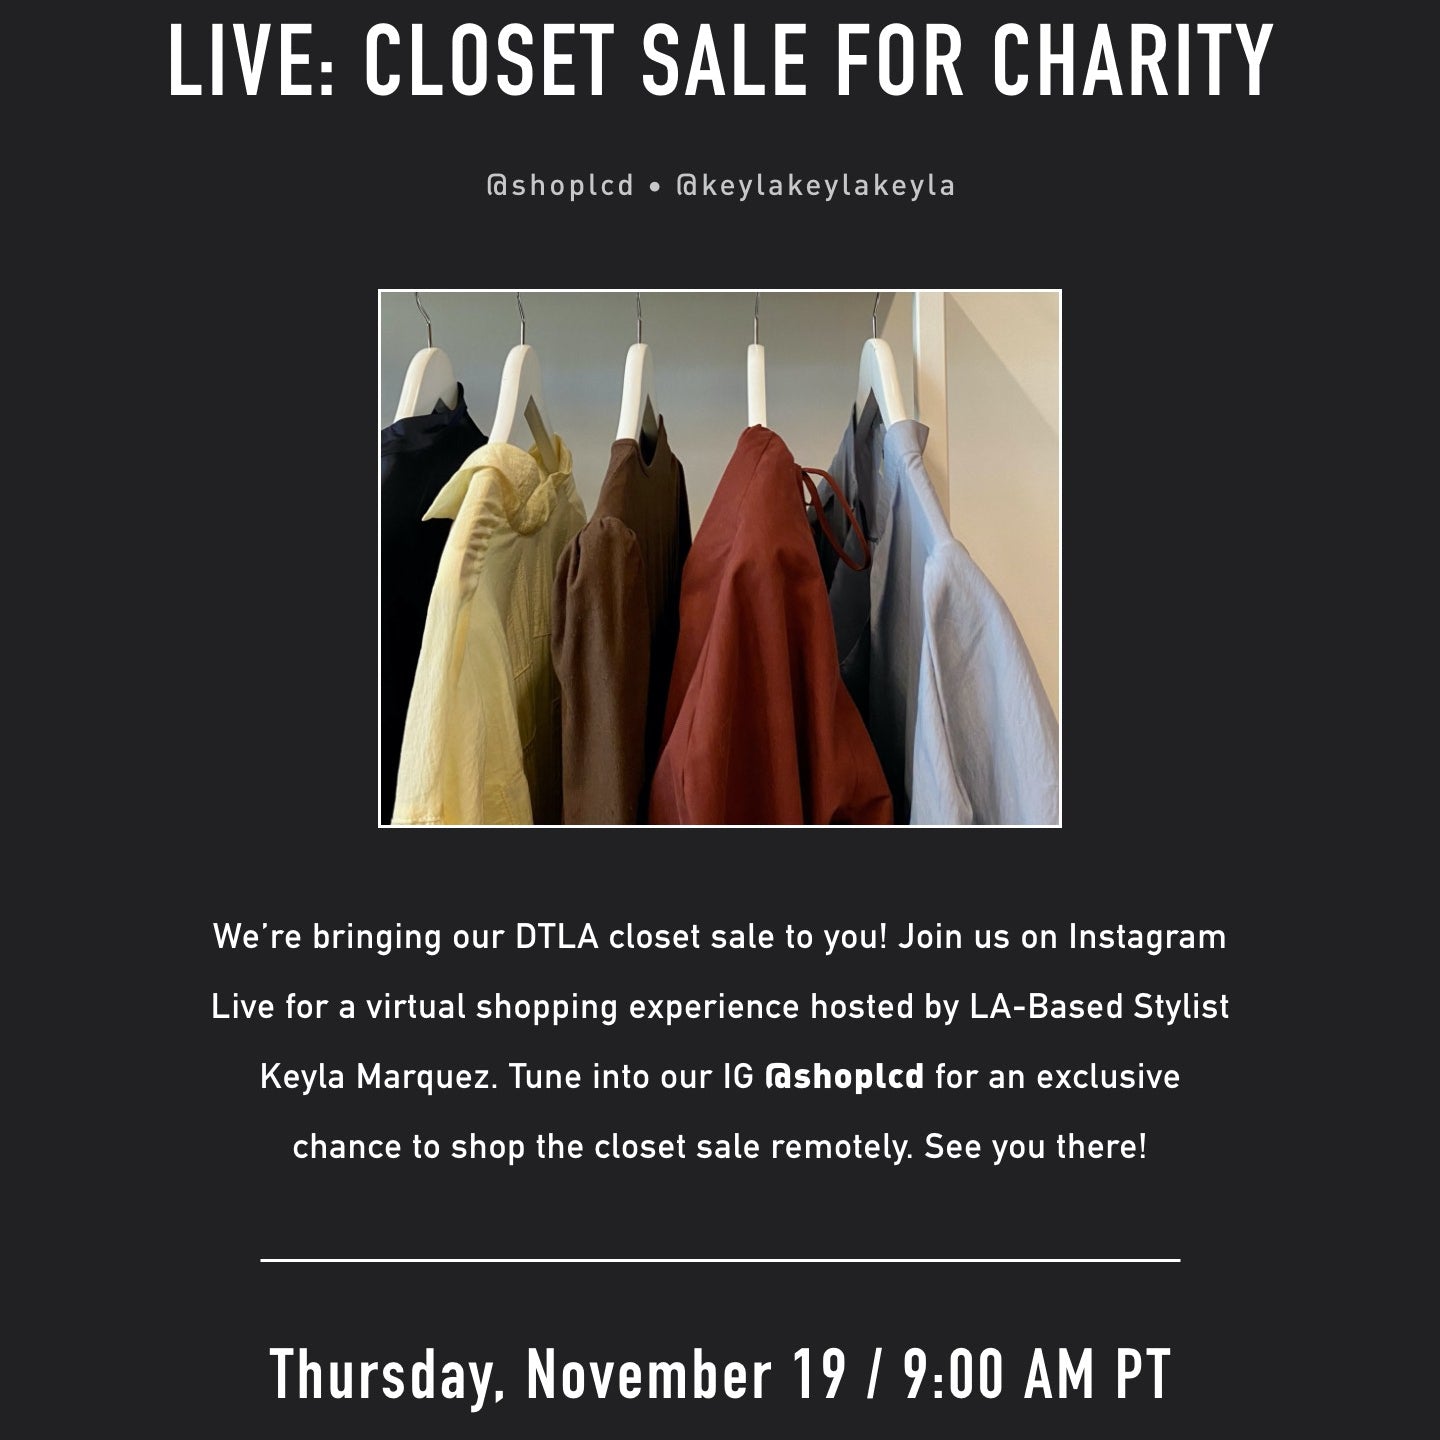 IG Live Shopping: Closet Sale for Charity